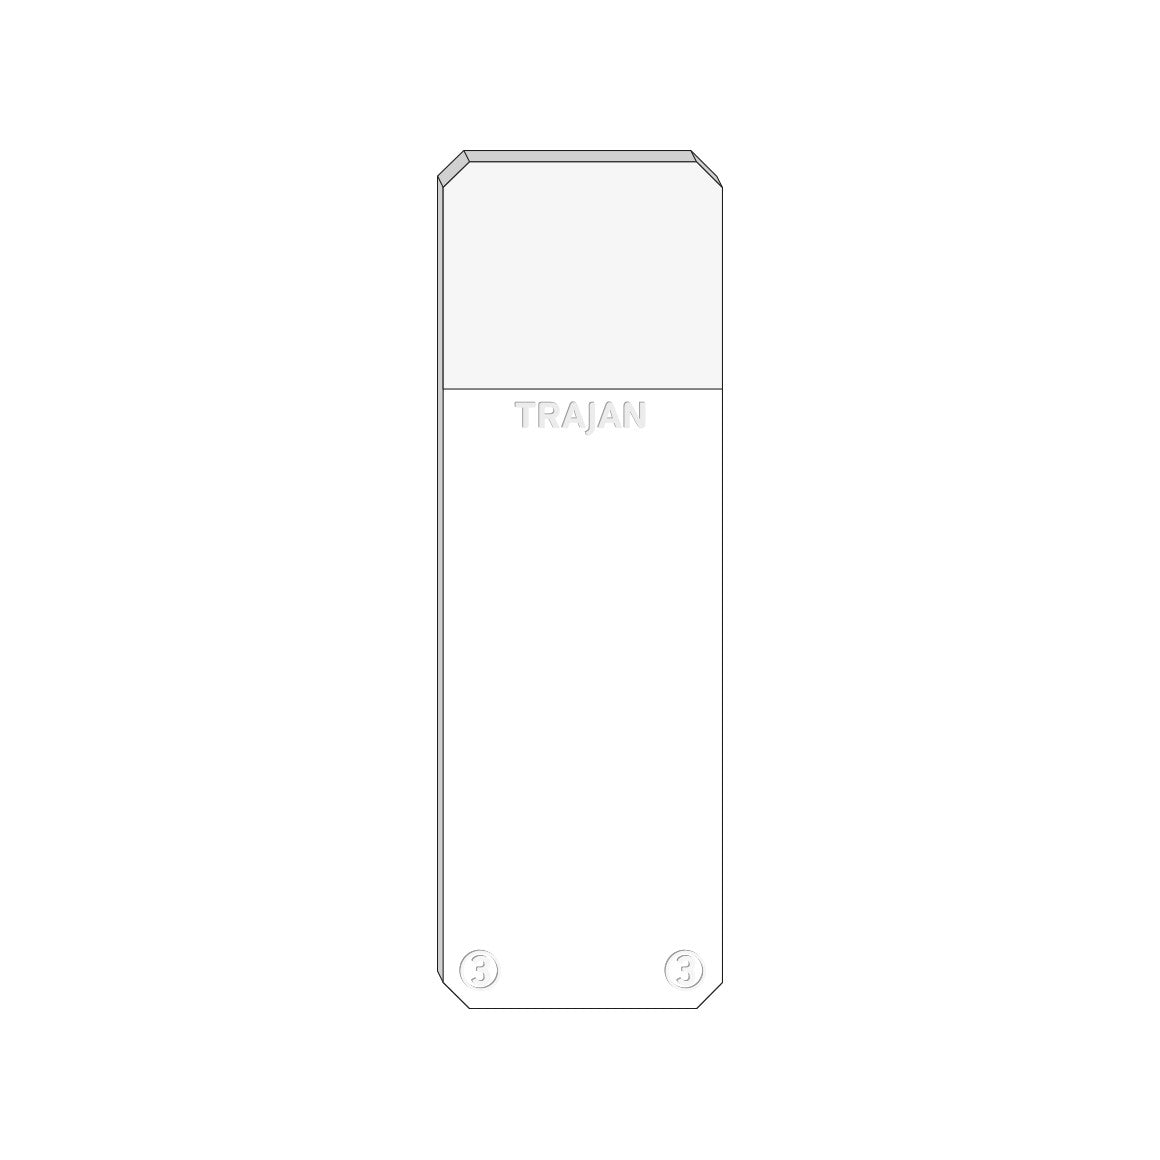 Trajan Scientific and Medical, Series 3 Adhesive Microscope Slides, White, Frost 20 mm, 76 mm x 26 mm